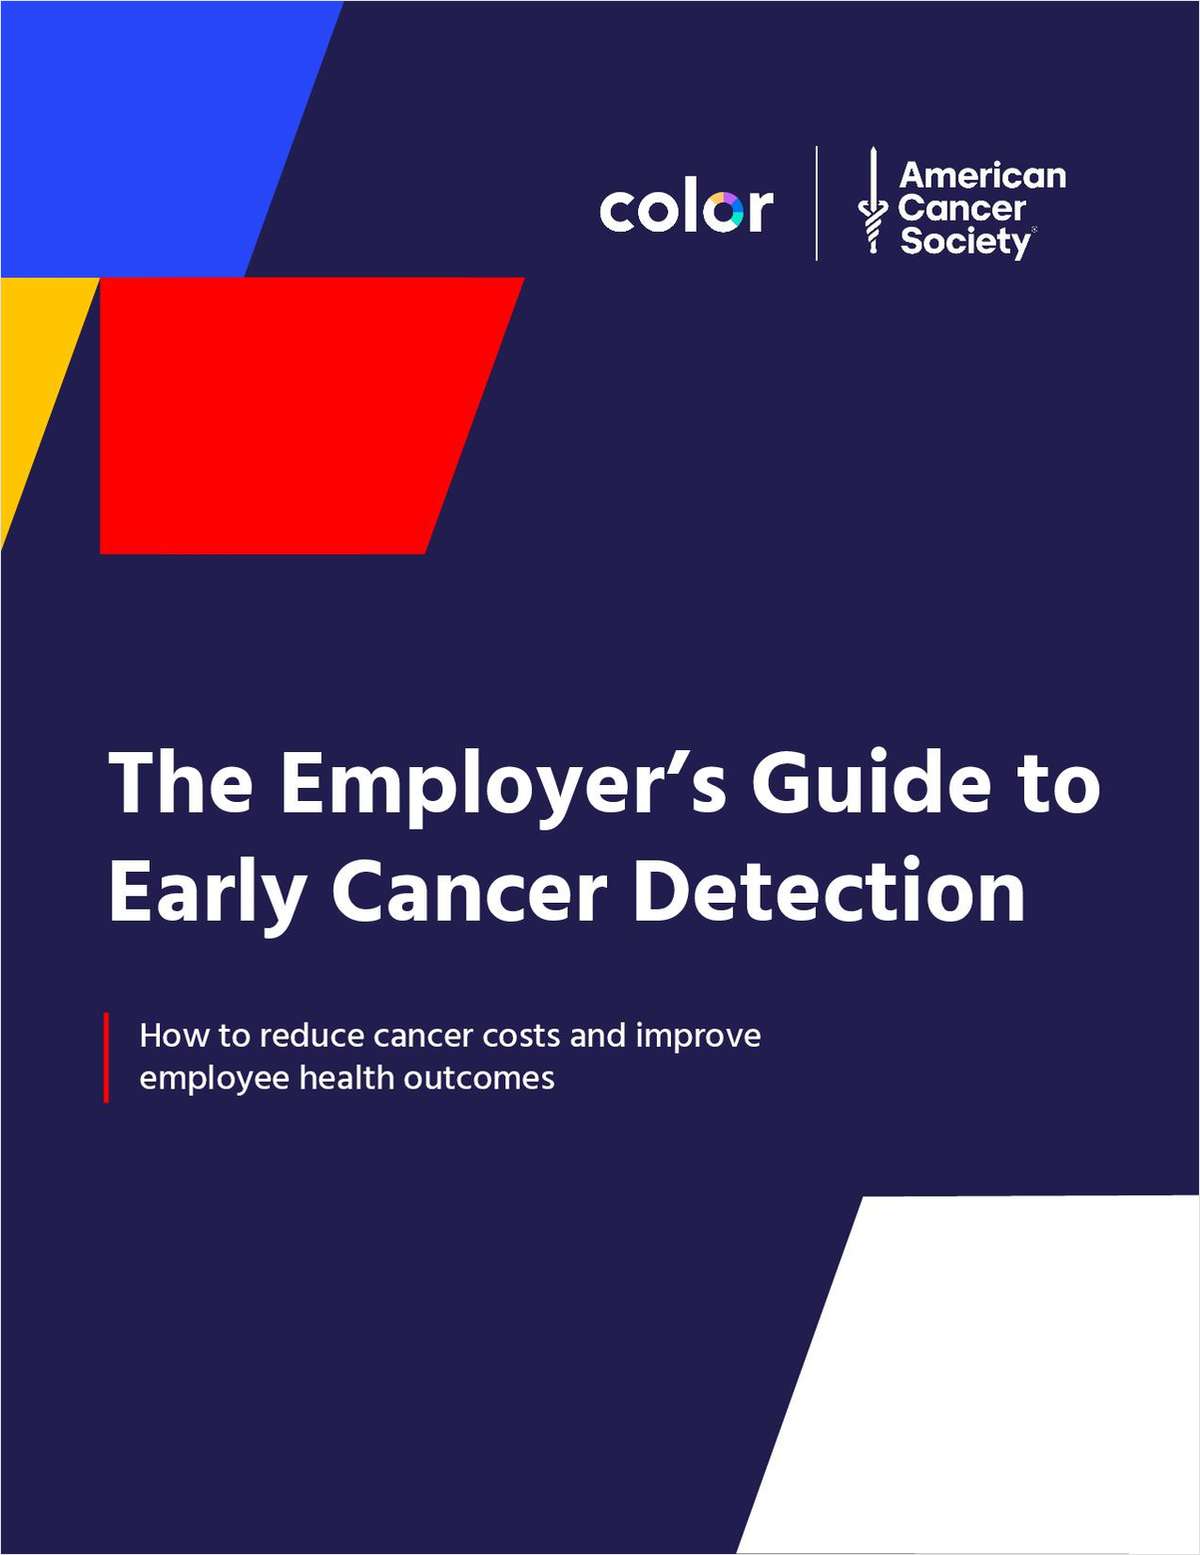 The Employer's Guide to Early Cancer Detection: How to Reduce Cancer Costs and Improve Employee Health Outcomes link